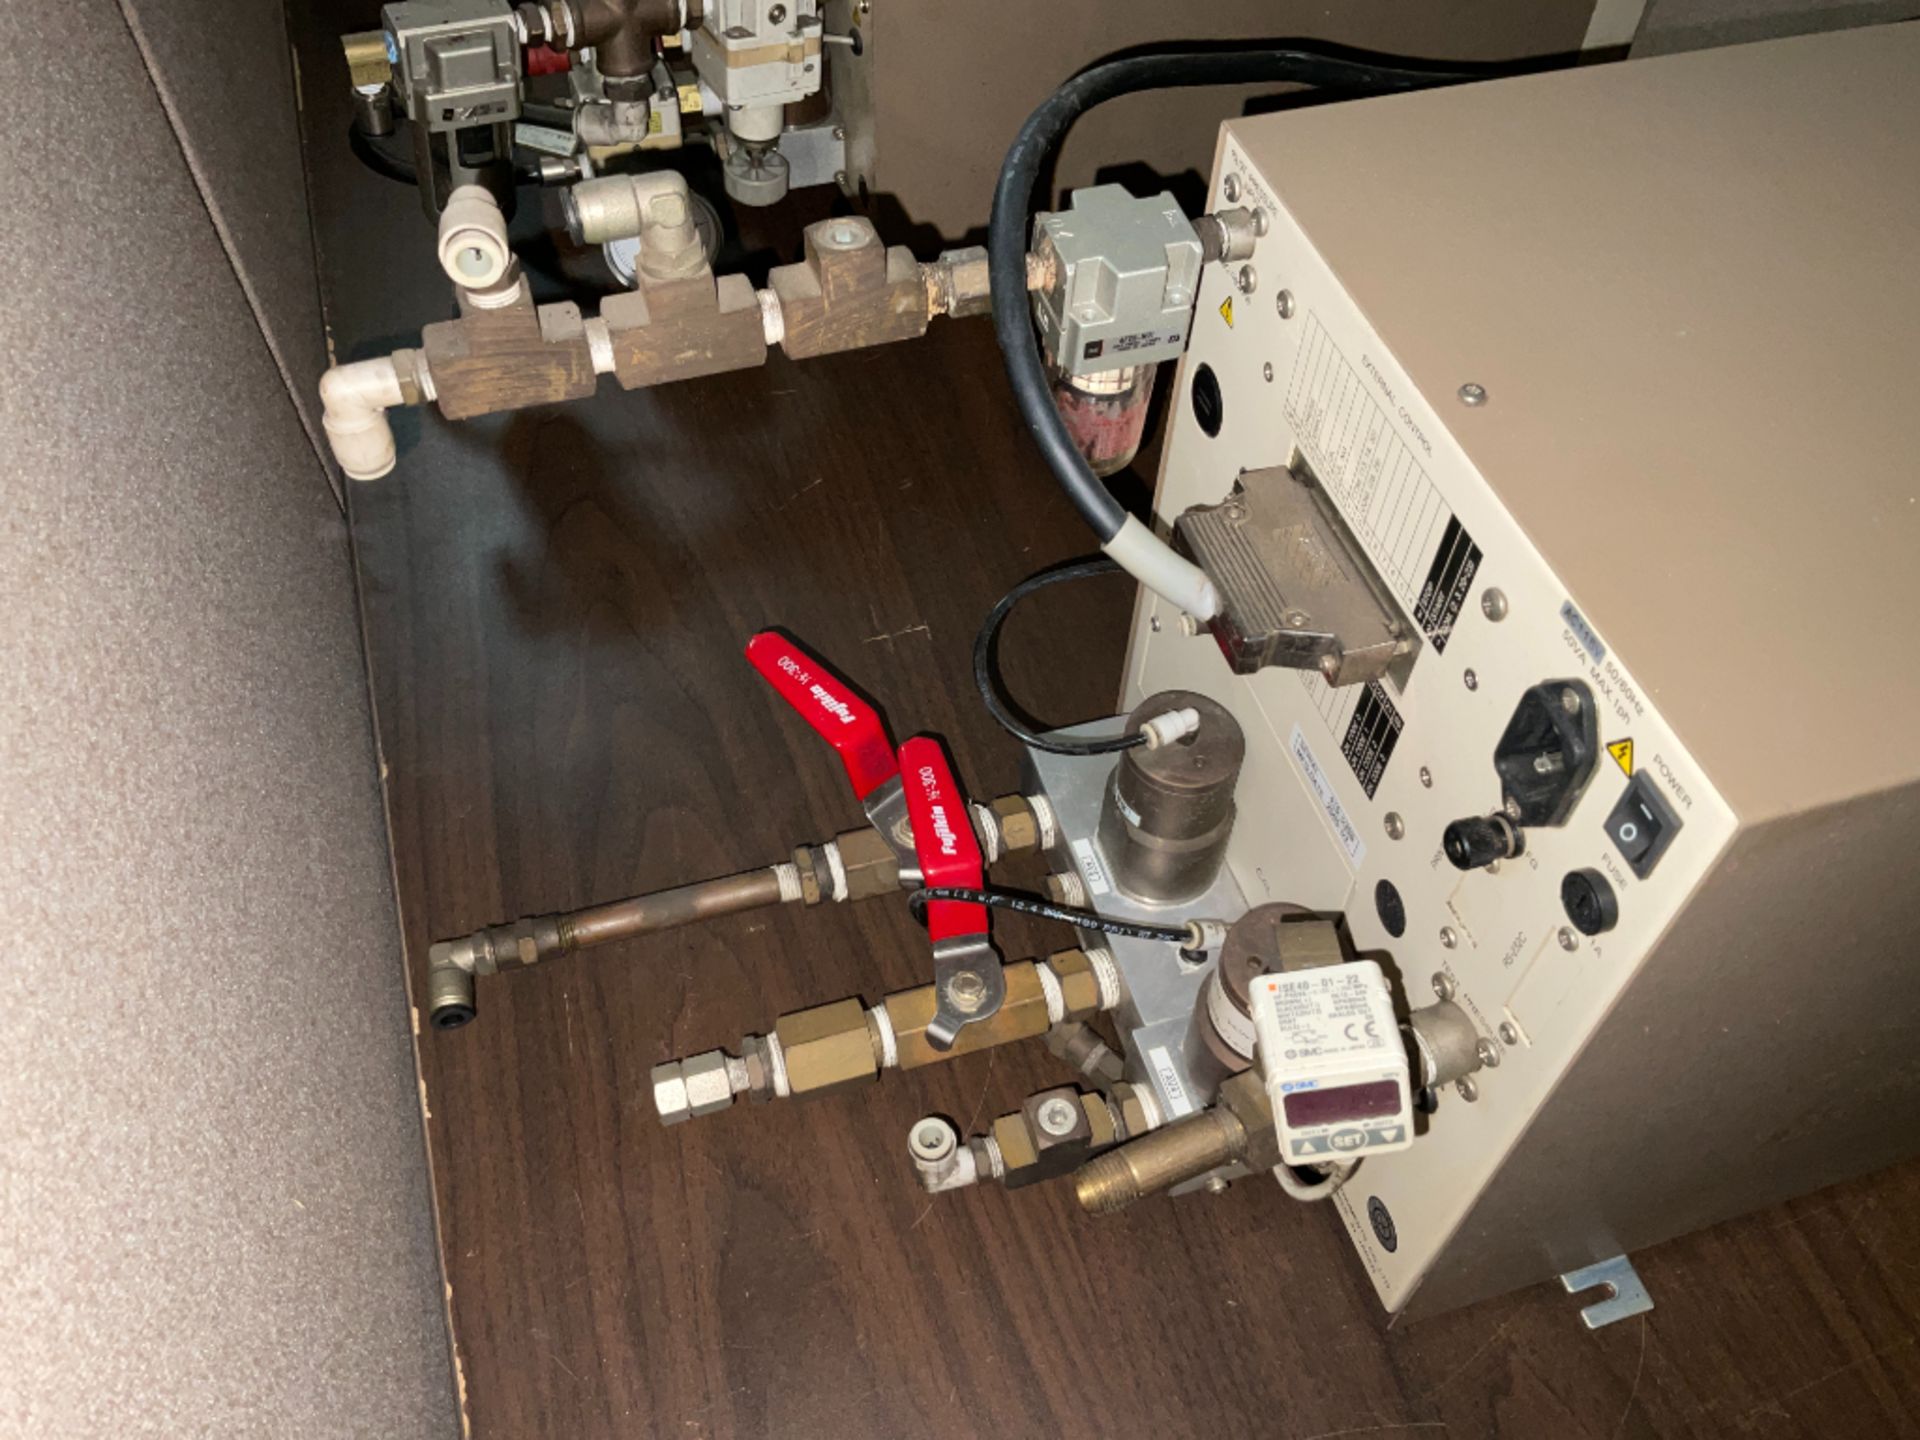 Cosmo Air Flow Tester W/ Plumbing Af-2201 - Image 2 of 2